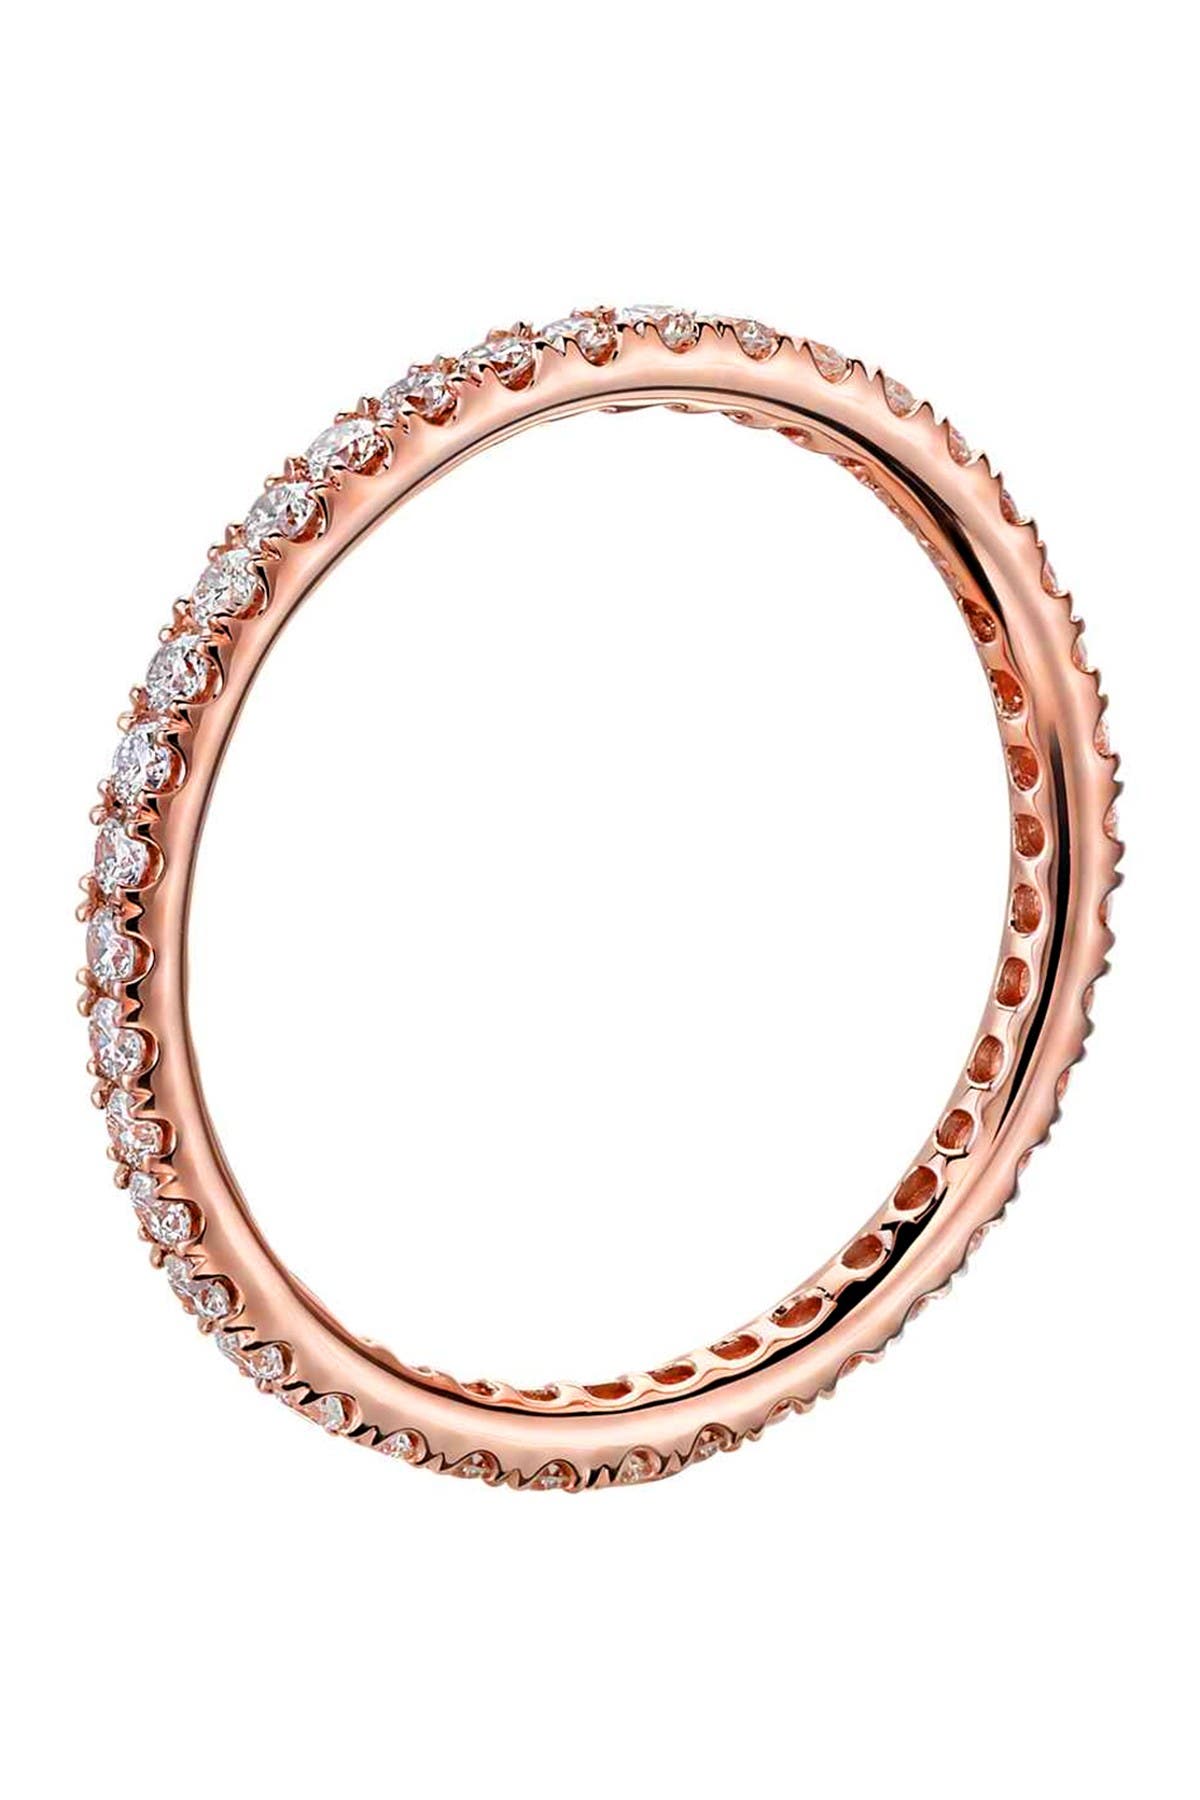 Suzy Levian 14k Rose Gold Diamond Eternity Band Ring In Pink